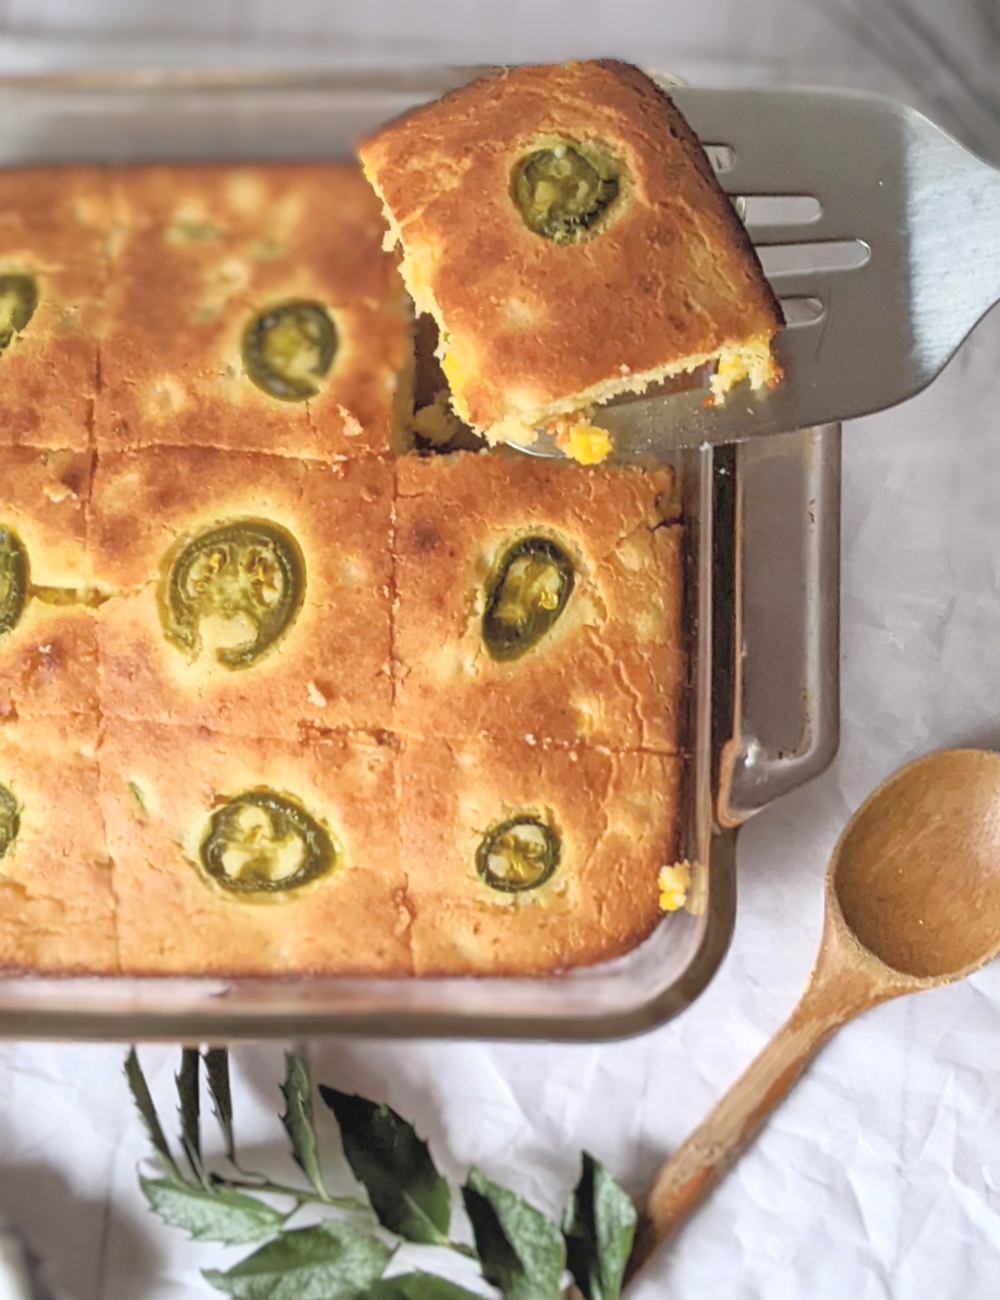 cornbread with sour cream and jalapeno peppers recipes spicy sweet cornbread with peppers and sugar